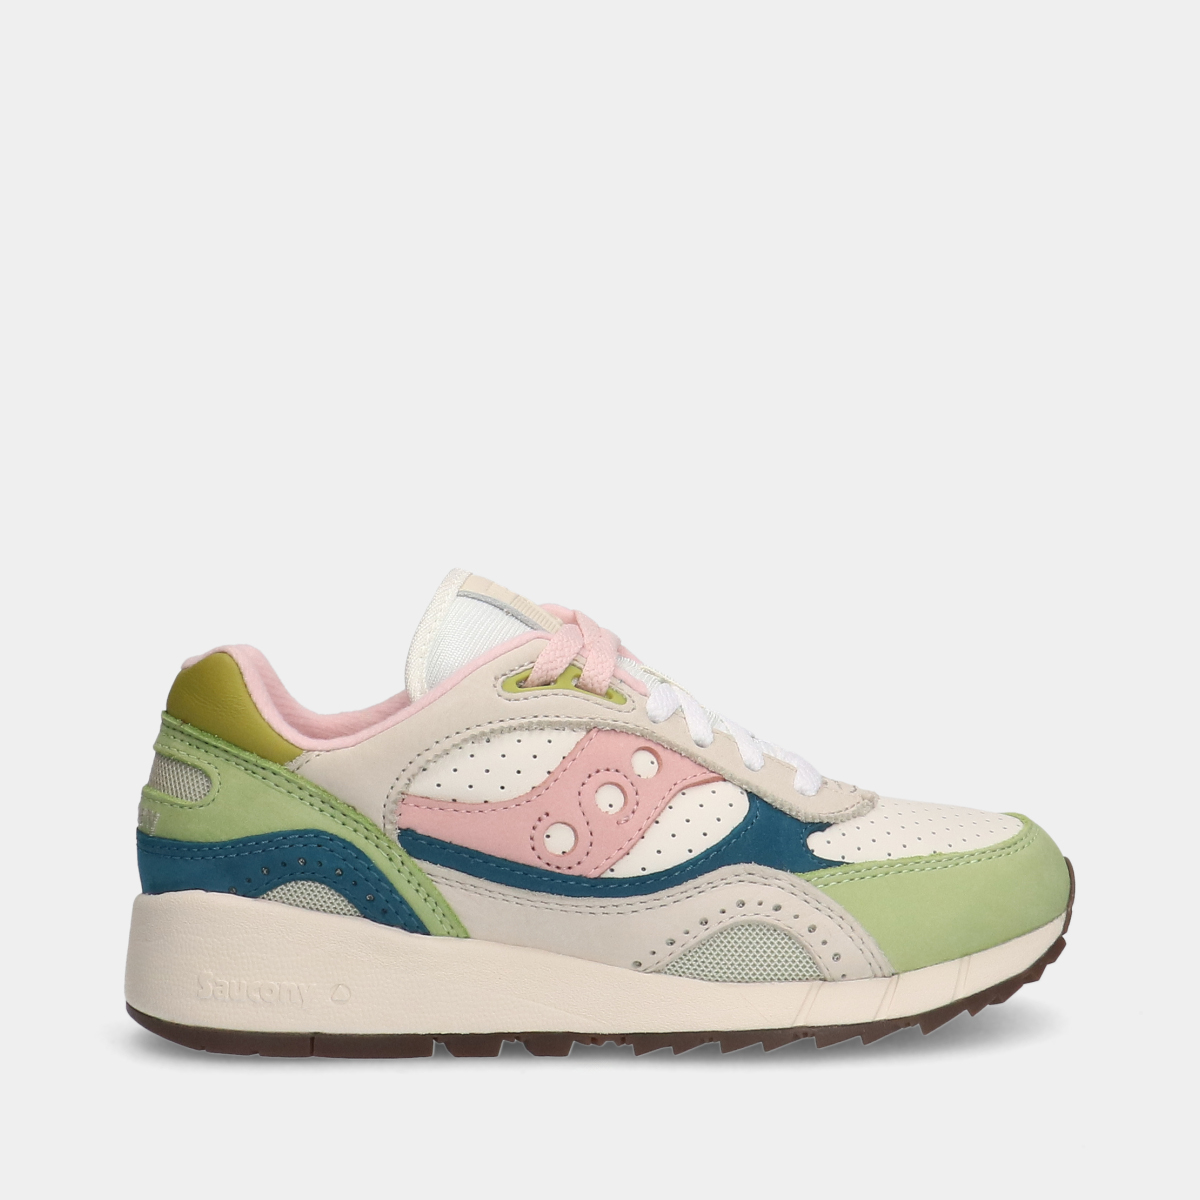 Saucony shadow 6000 green multi sneakers